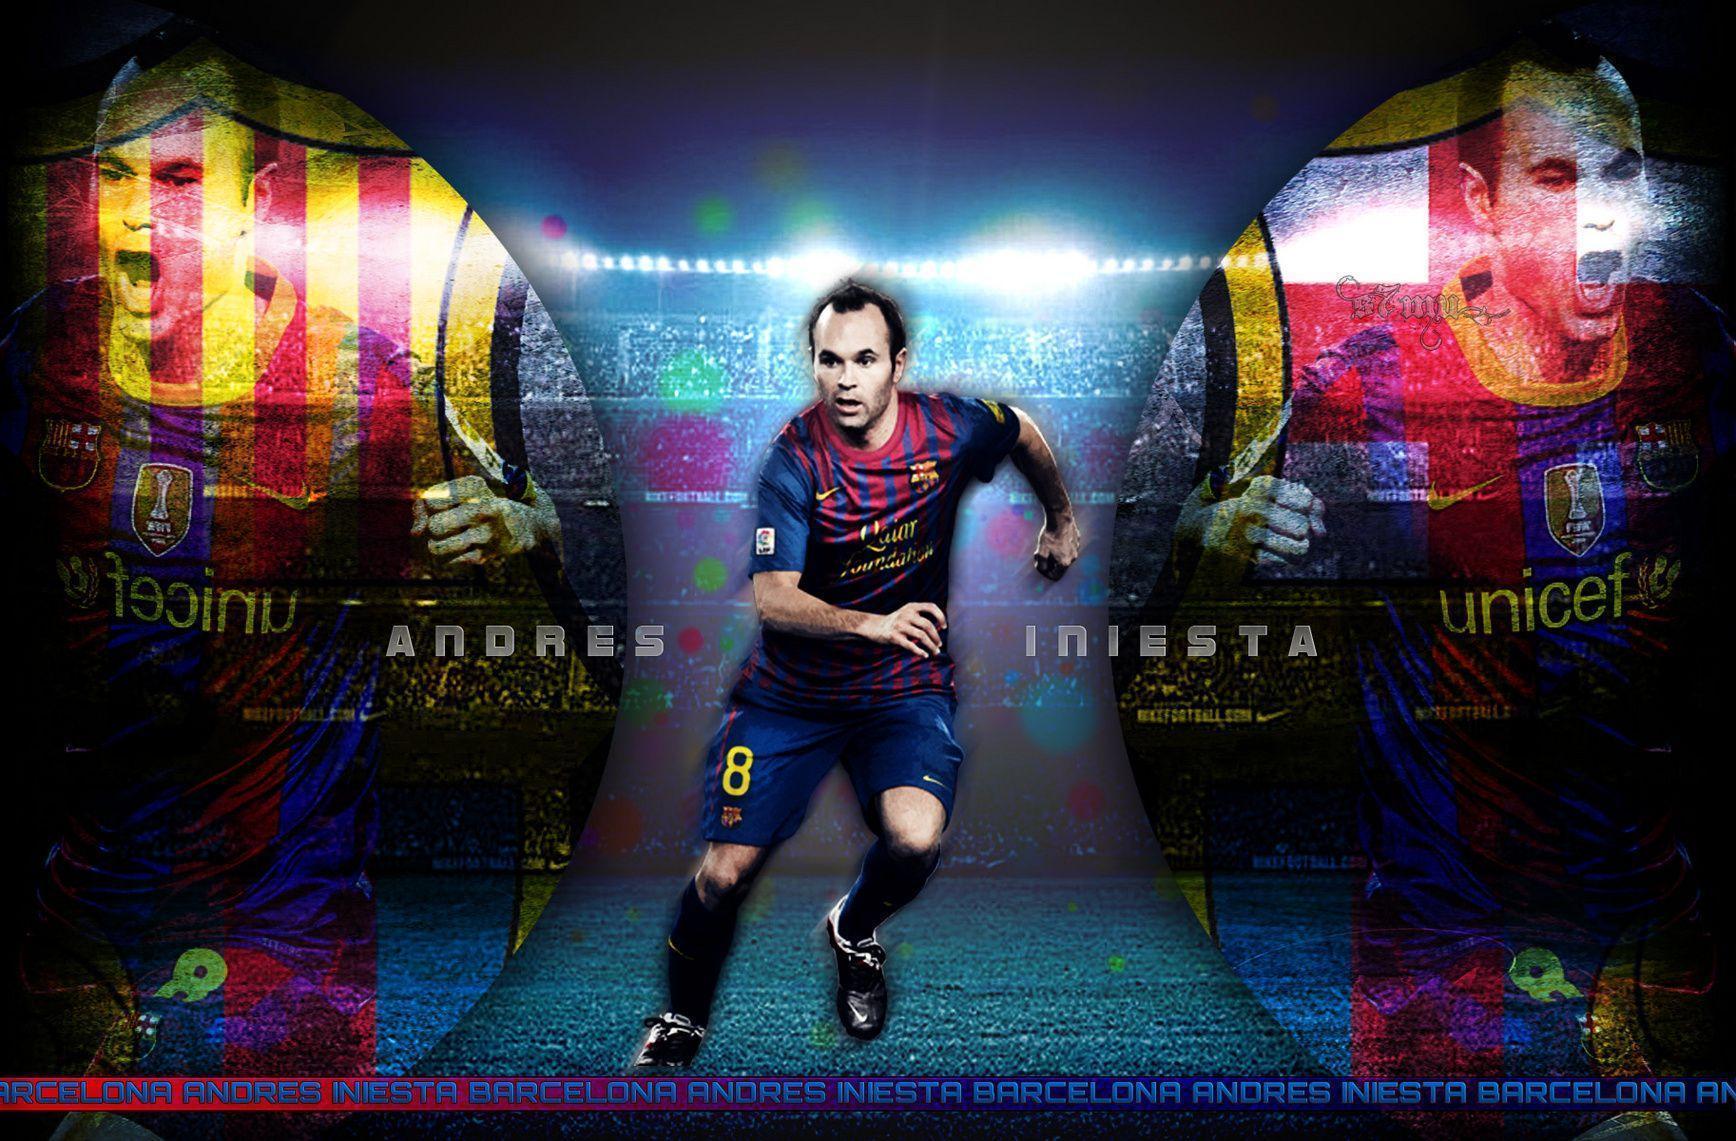 The midfielder of Barcelona Andres Iniesta wallpaper and image